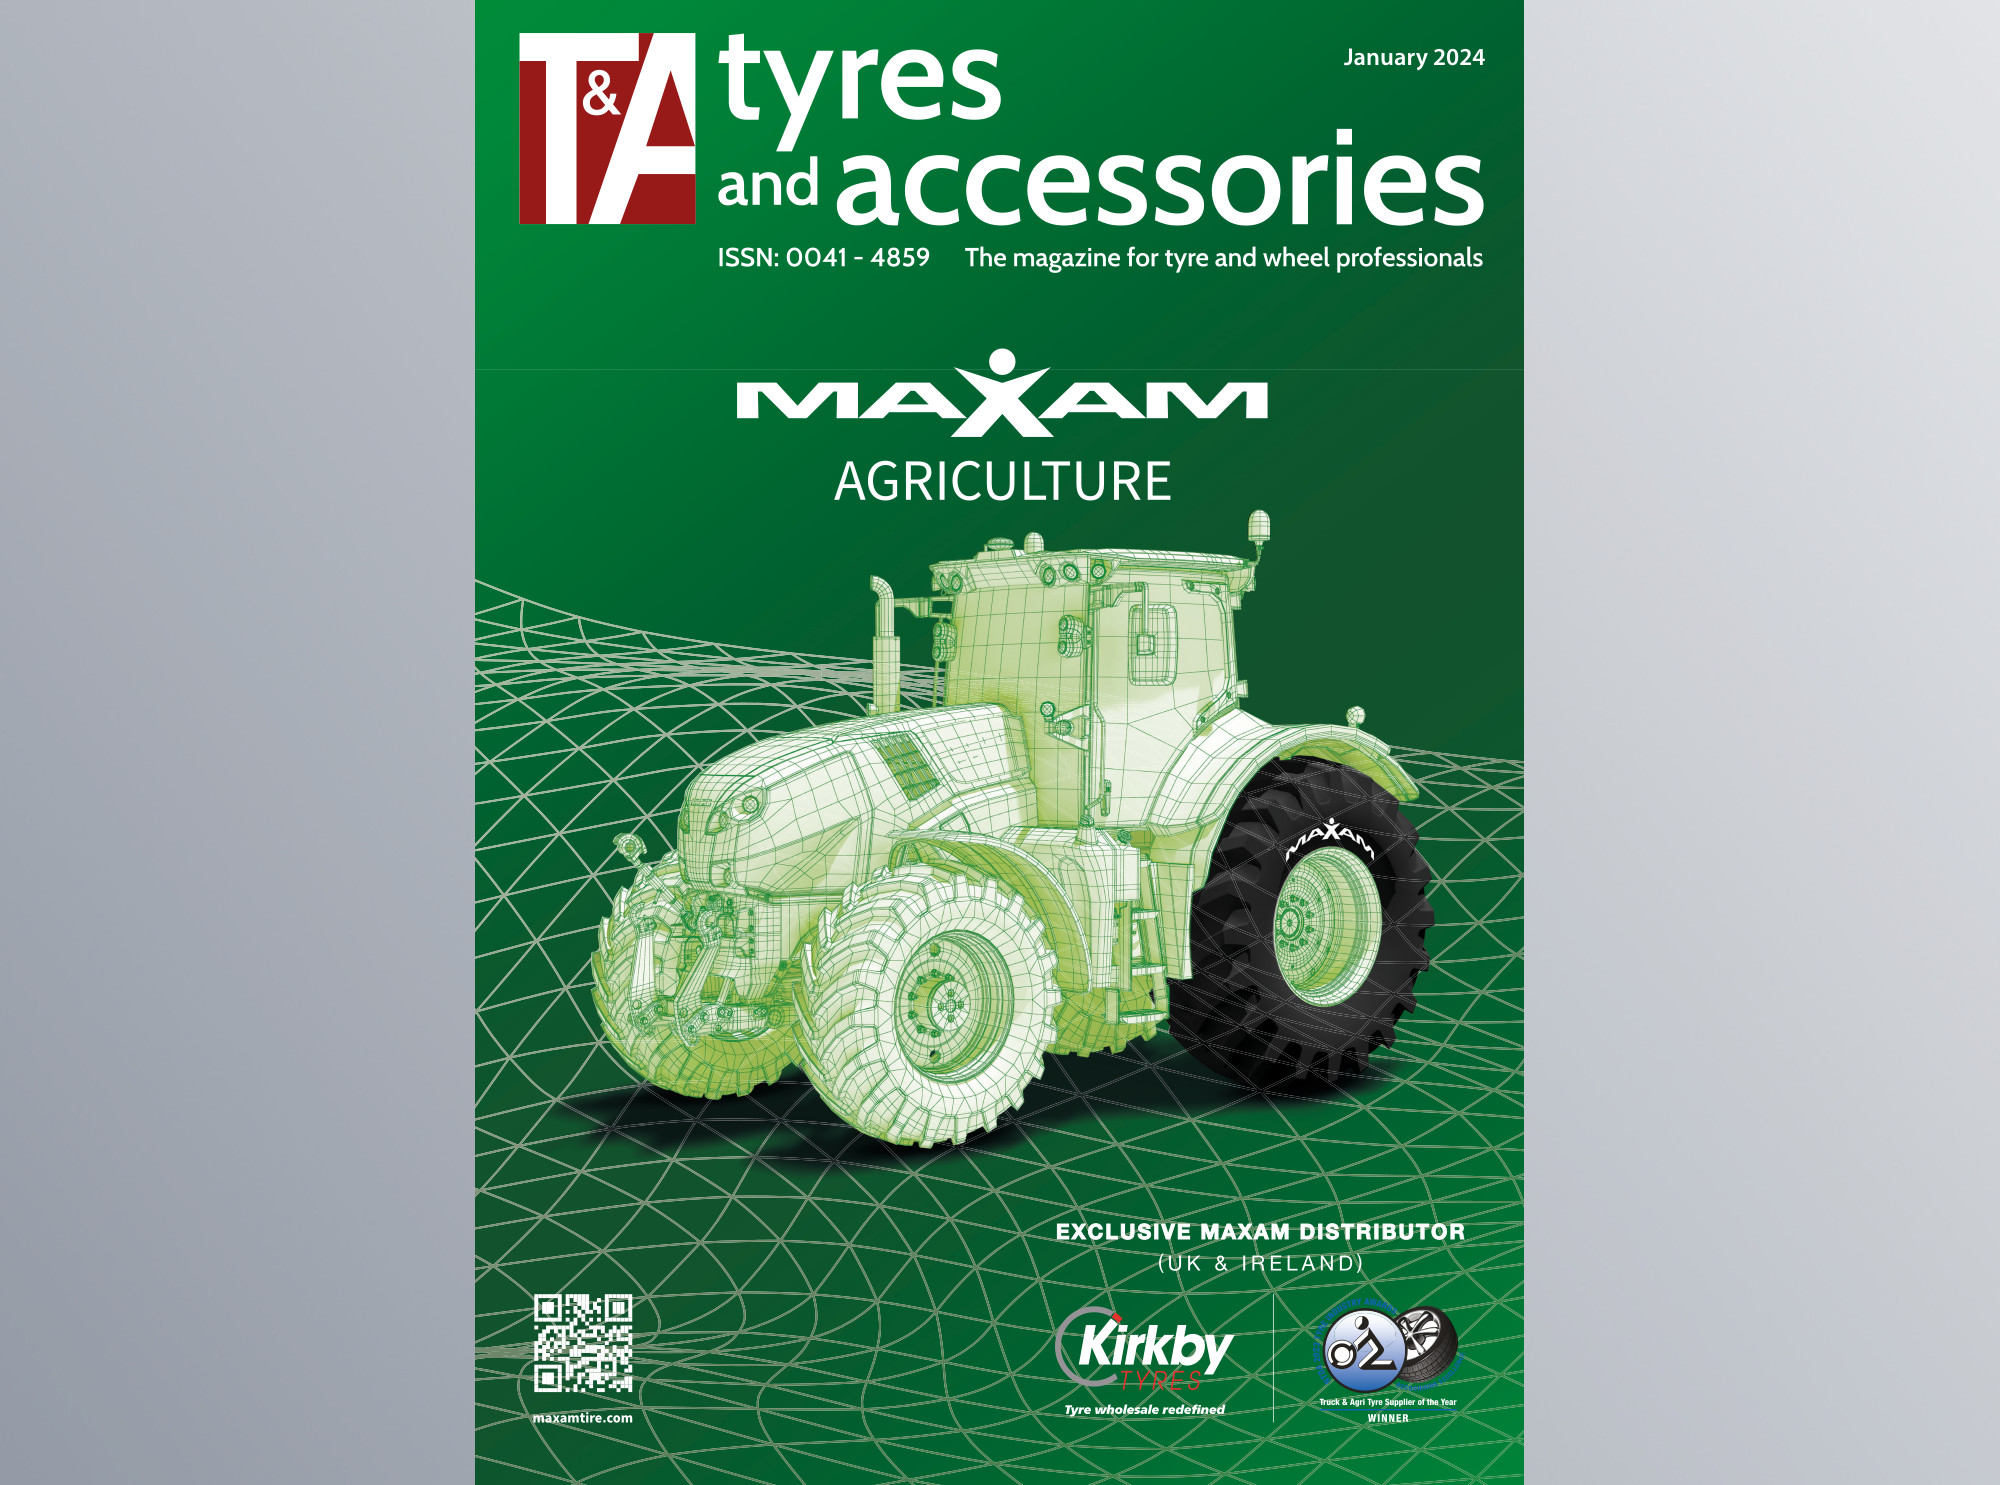 Tyres & Accessories January 2024 issue available to read online now